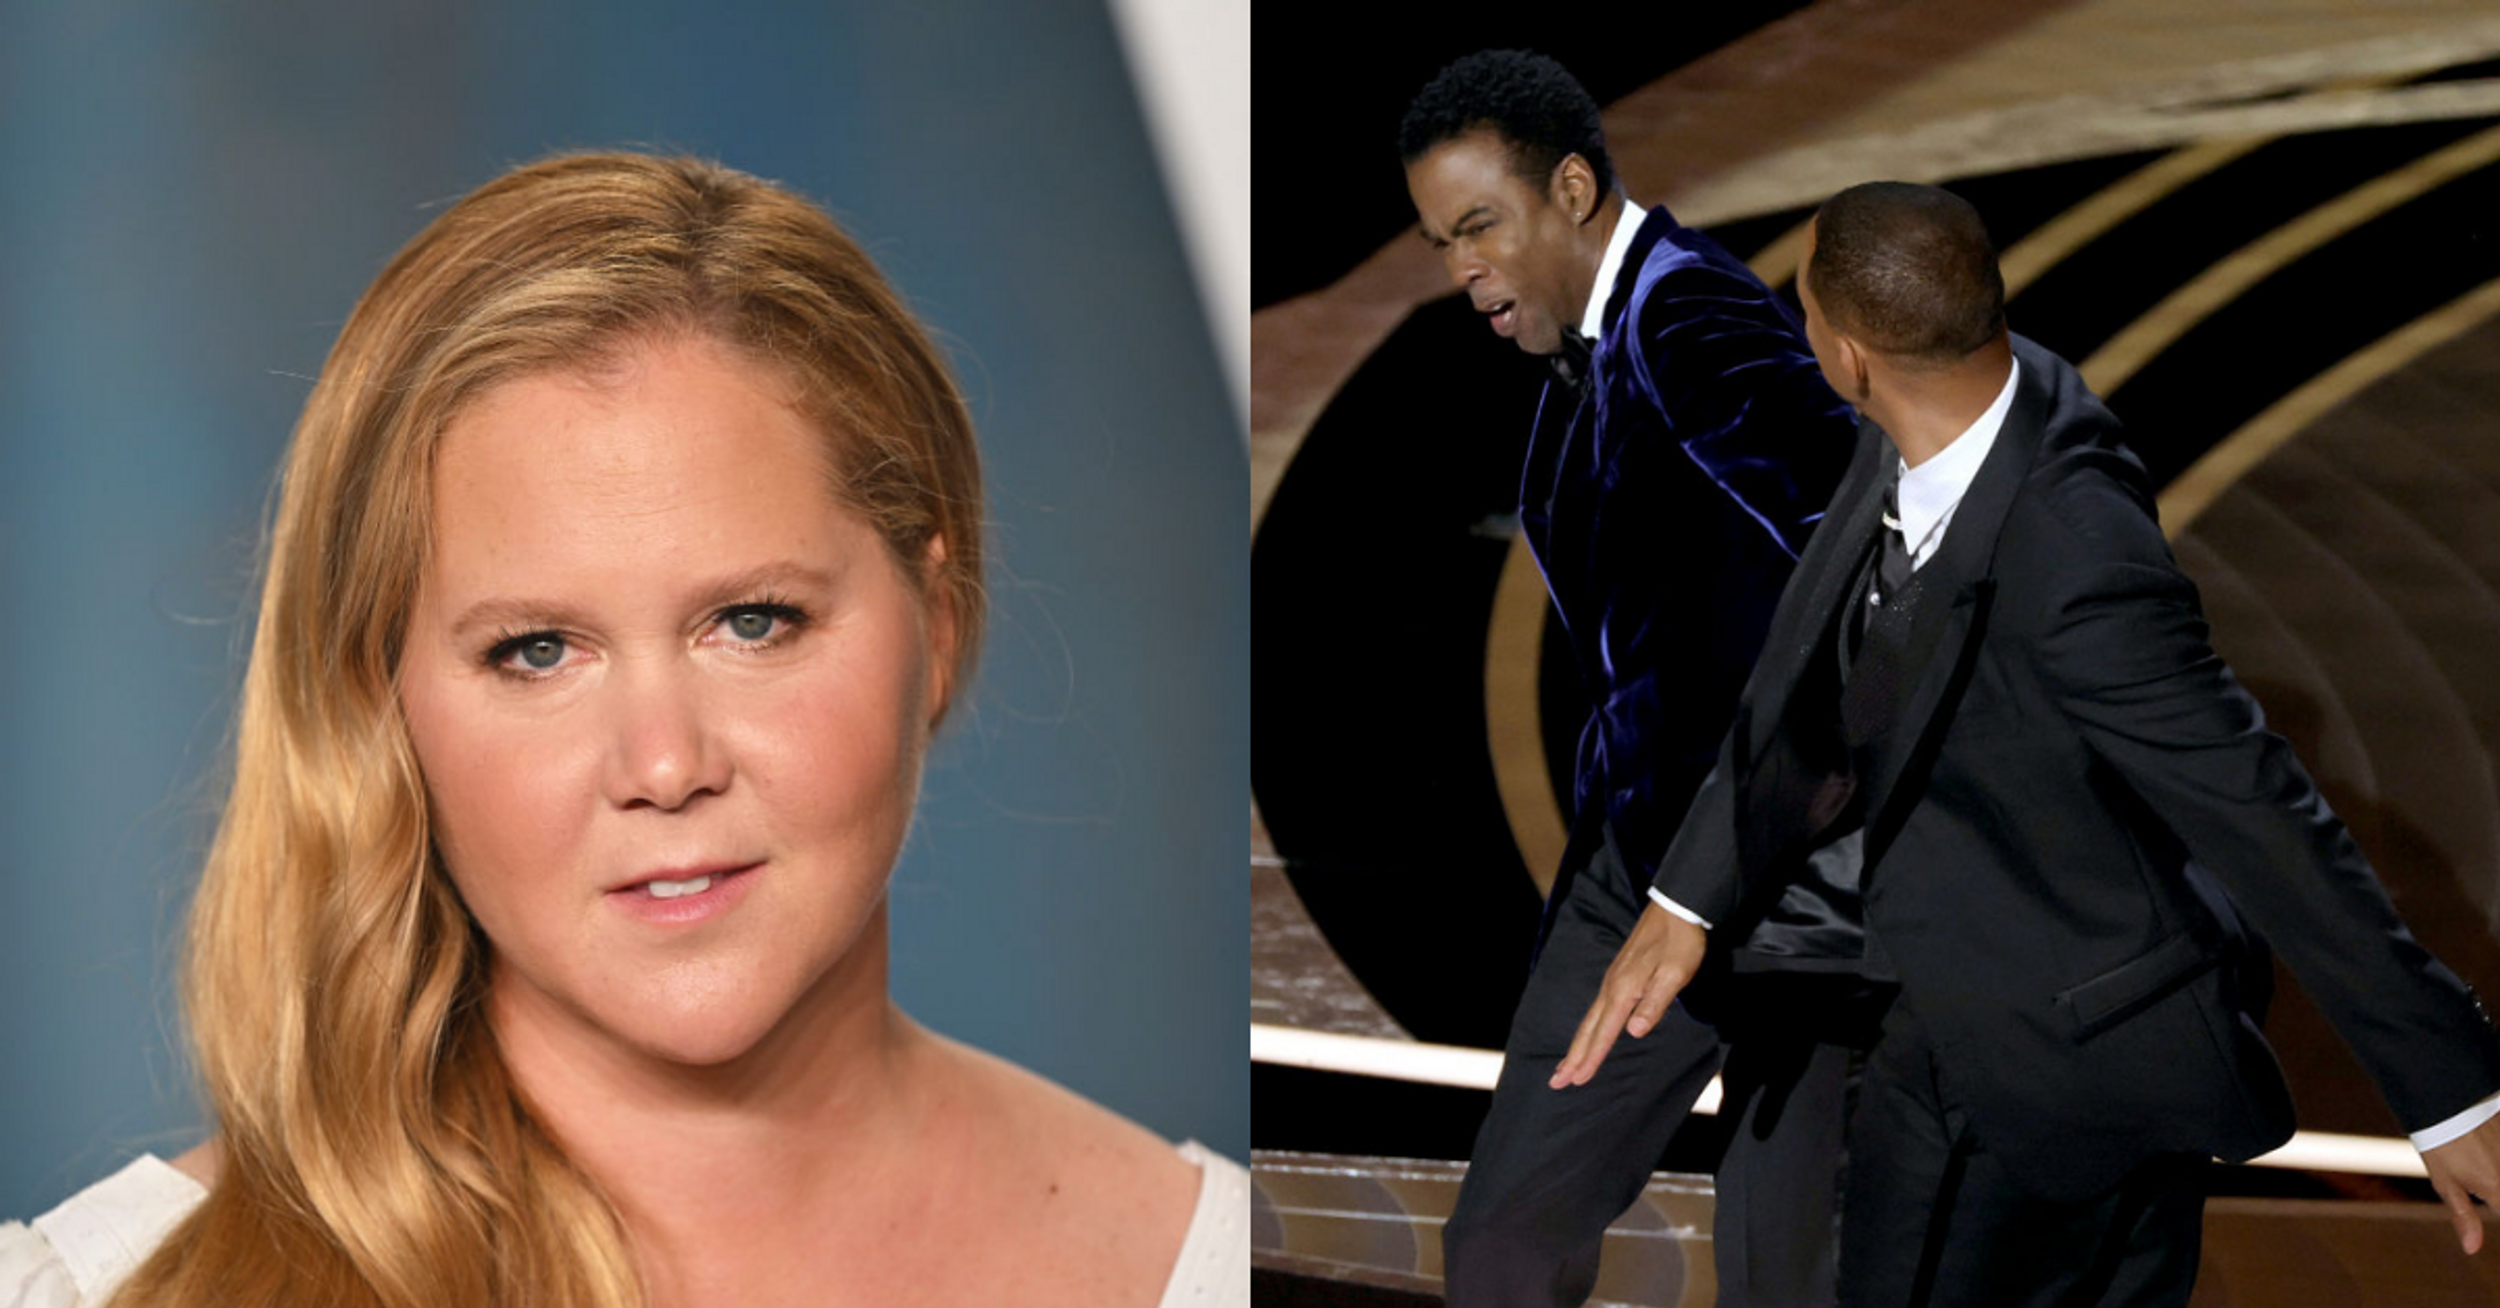 Amy Schumer Says She's 'Still Traumatized' By Will Smith Slap: 'Waiting For This Sickening Feeling To Go Away'